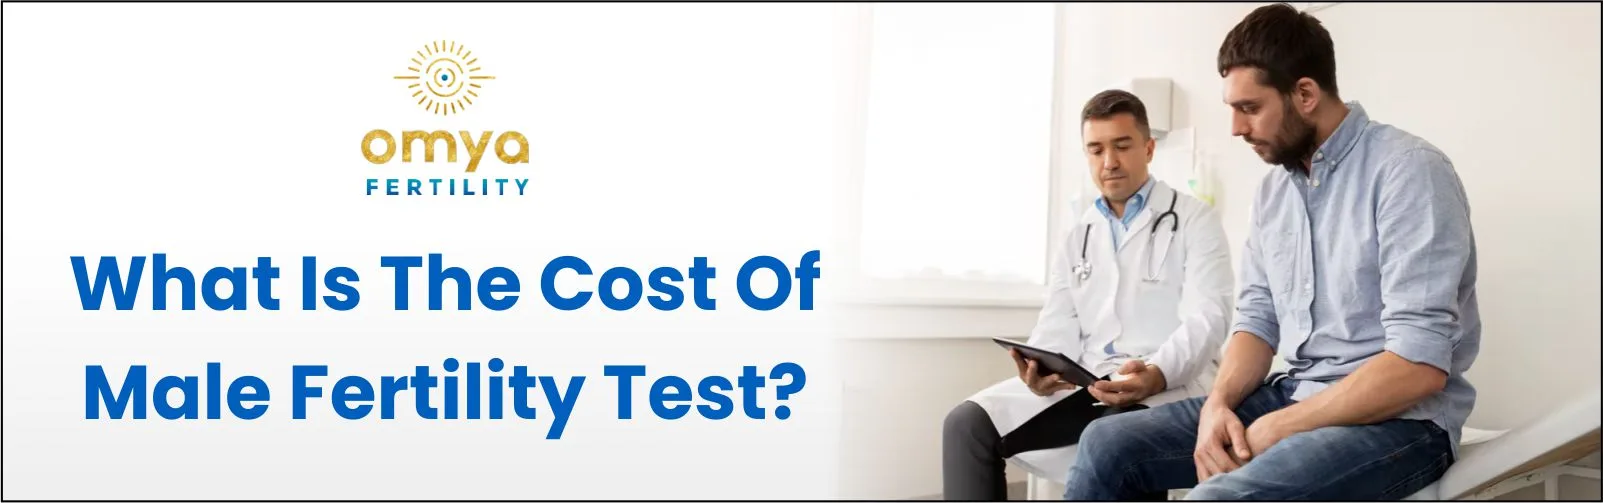 What is the cost of male fertility test?